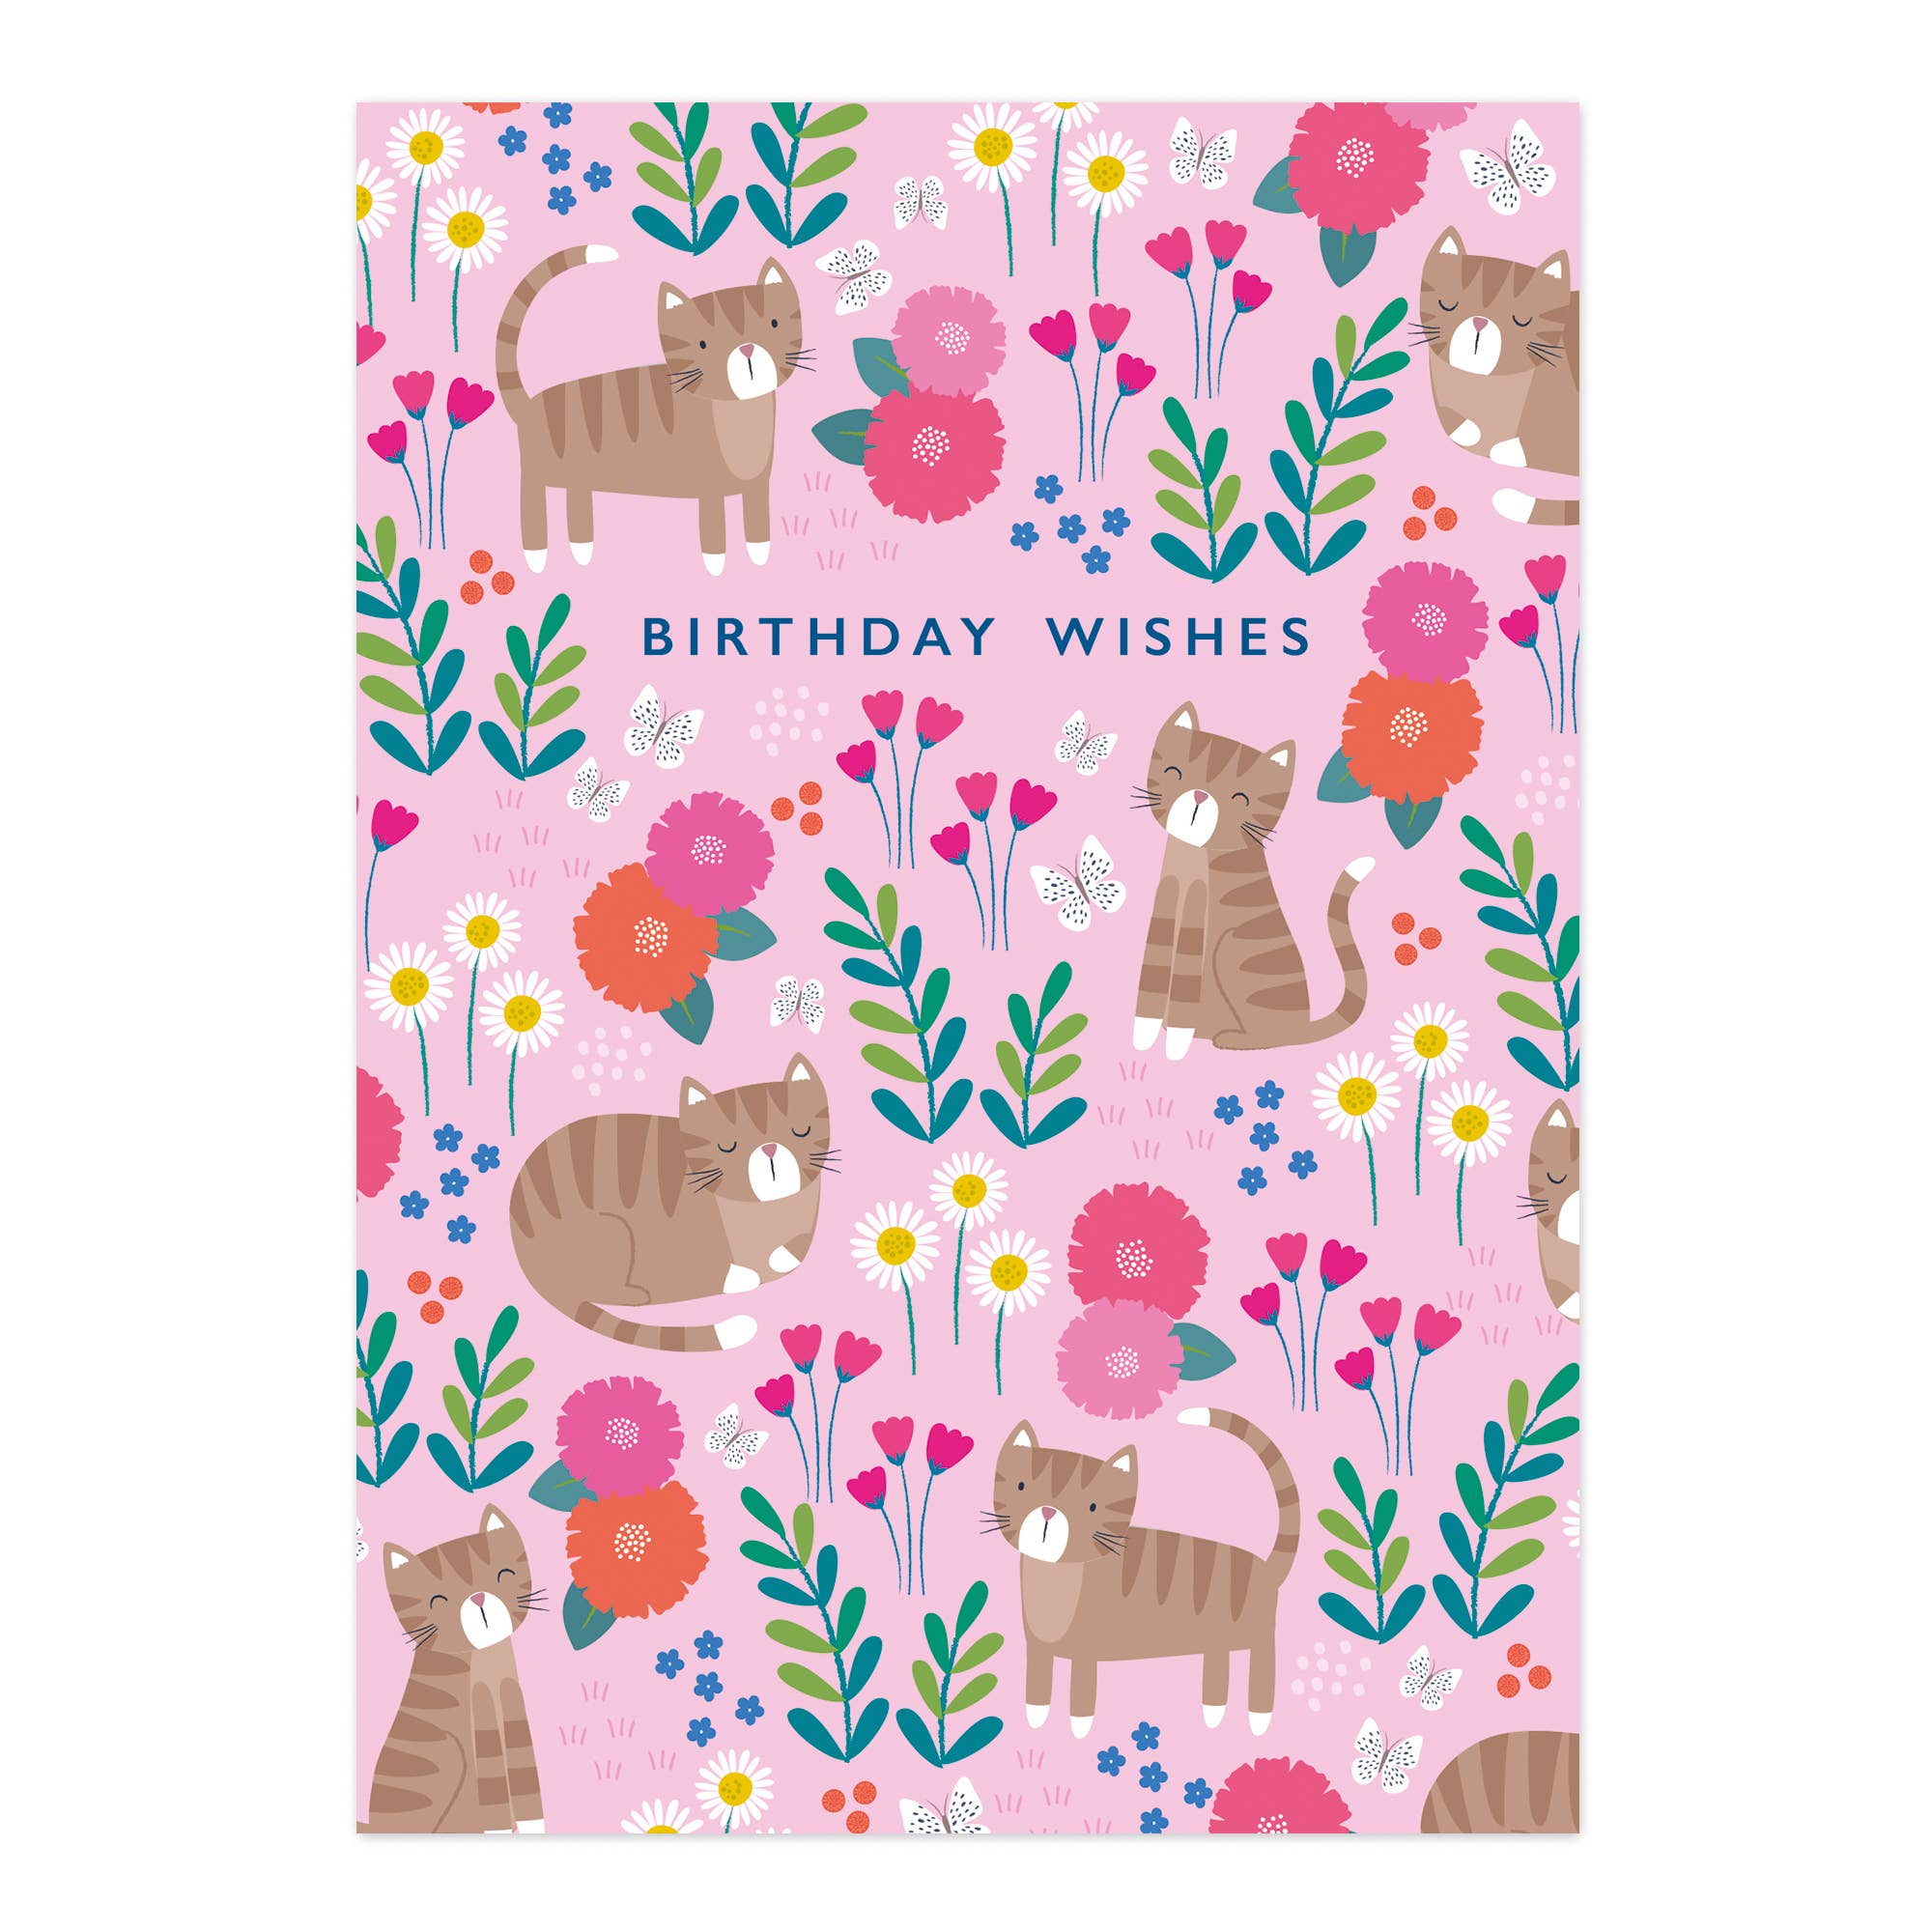 Birthday Wishes Card /  Cute Tabby Cat and Floral Pattern